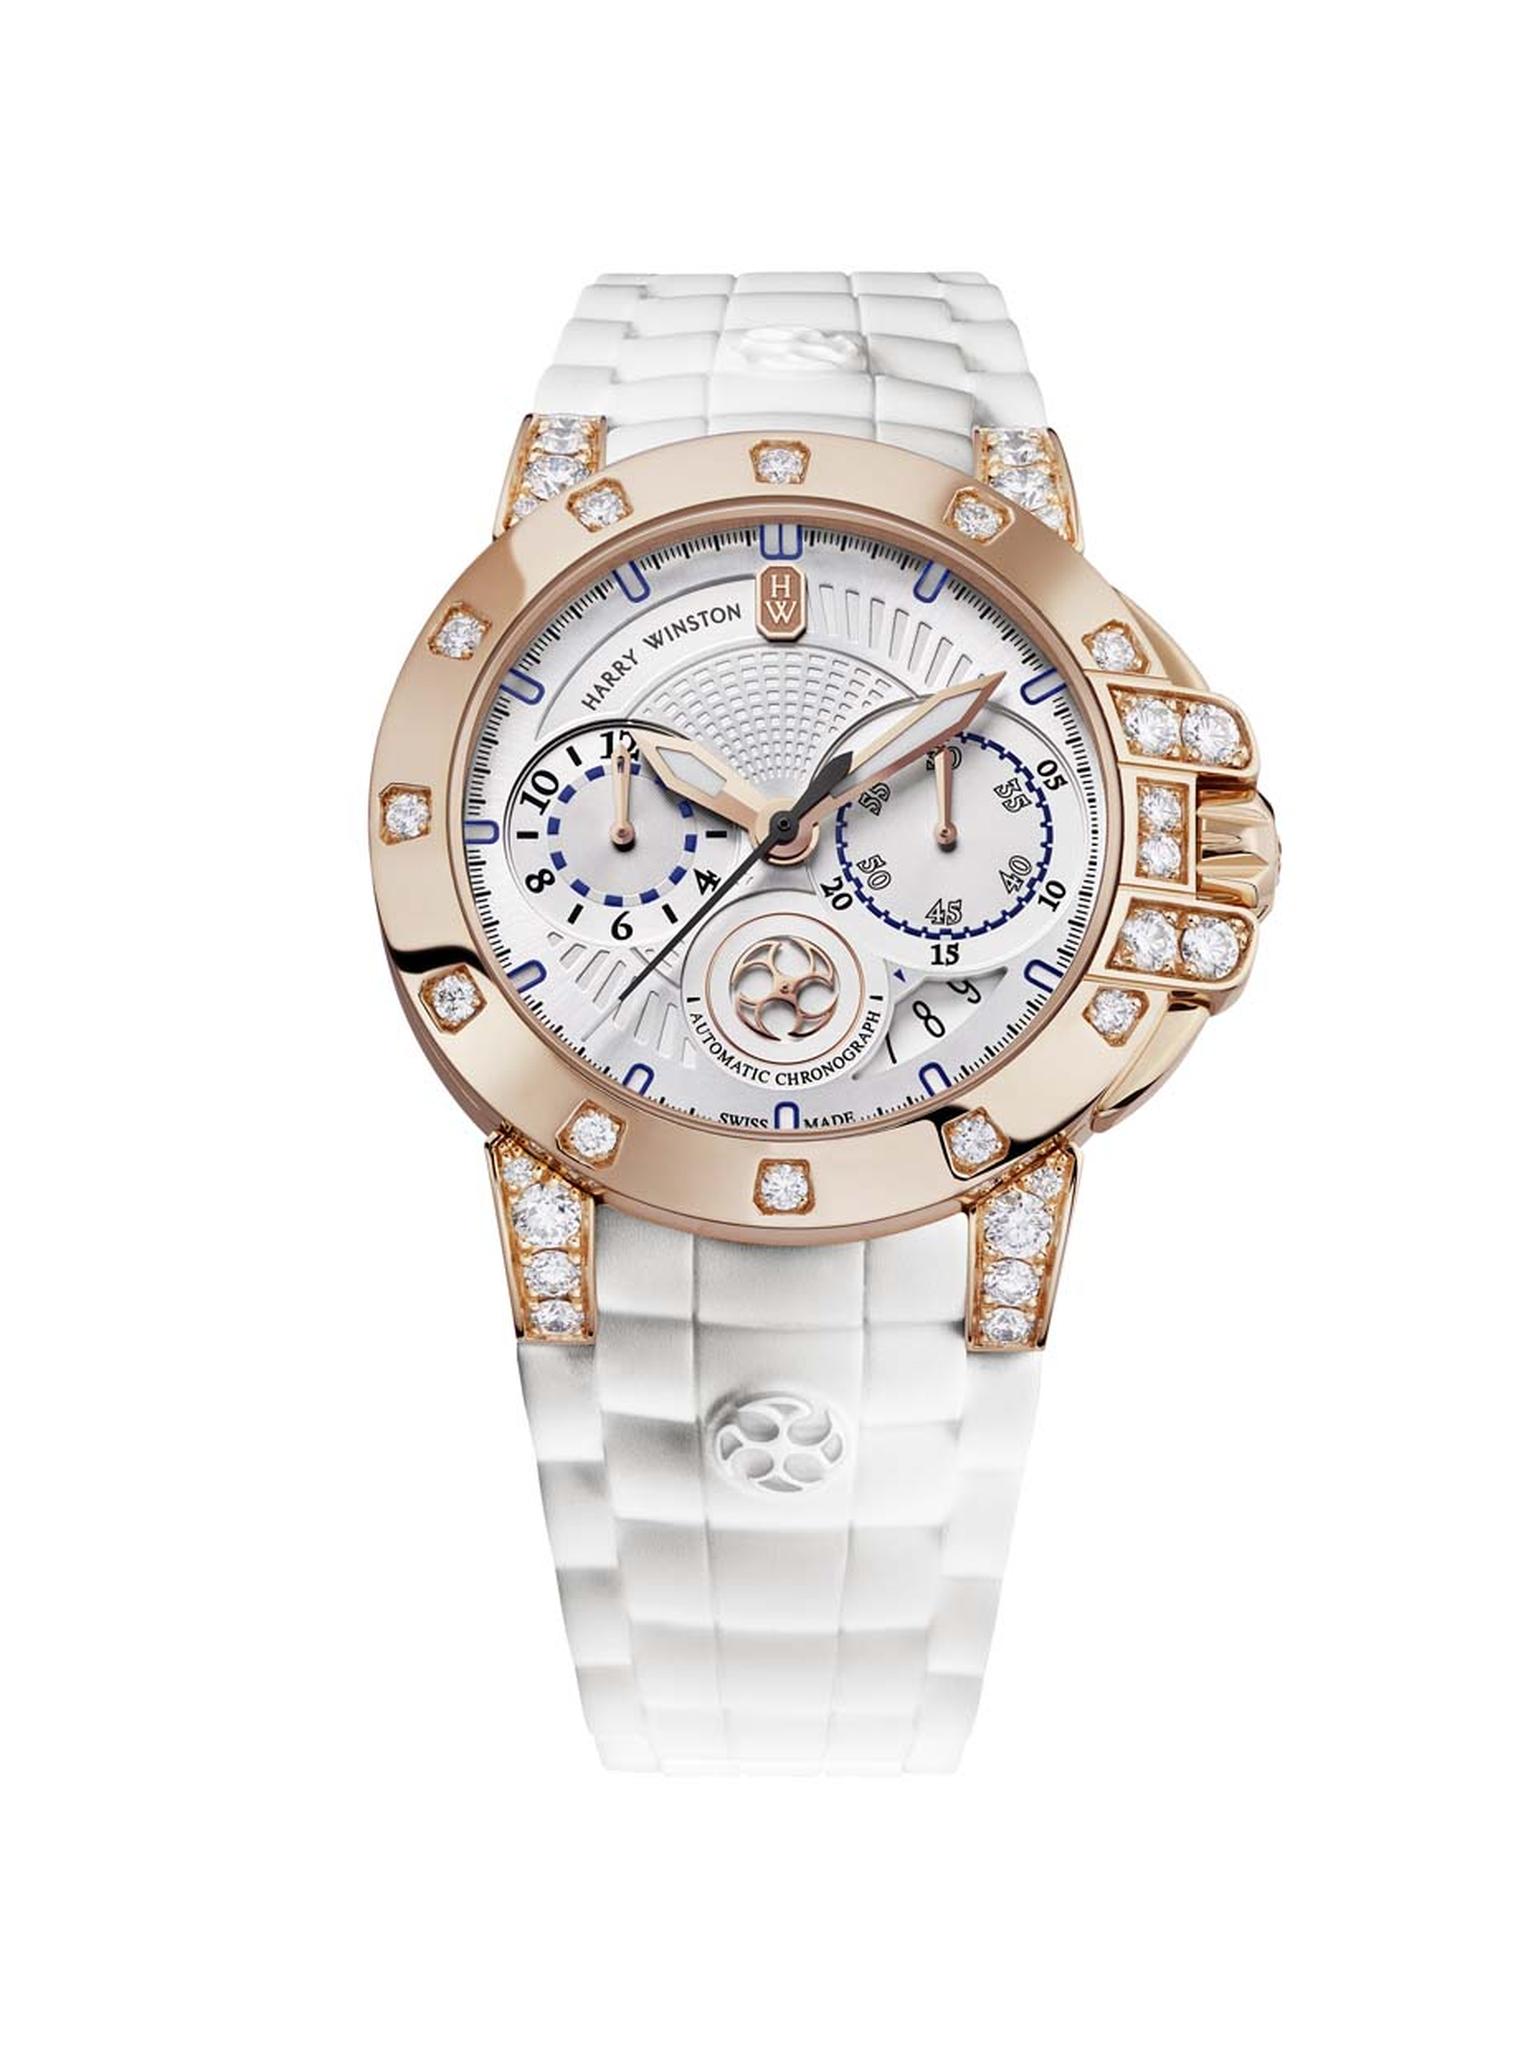 Harry Winston watches Ocean Chronograph Automatic 36mm for ladies marries a sophisticated sporty chronograph movement with luxurious aesthetics and a liberal sprinkling of the house speciality: diamonds.